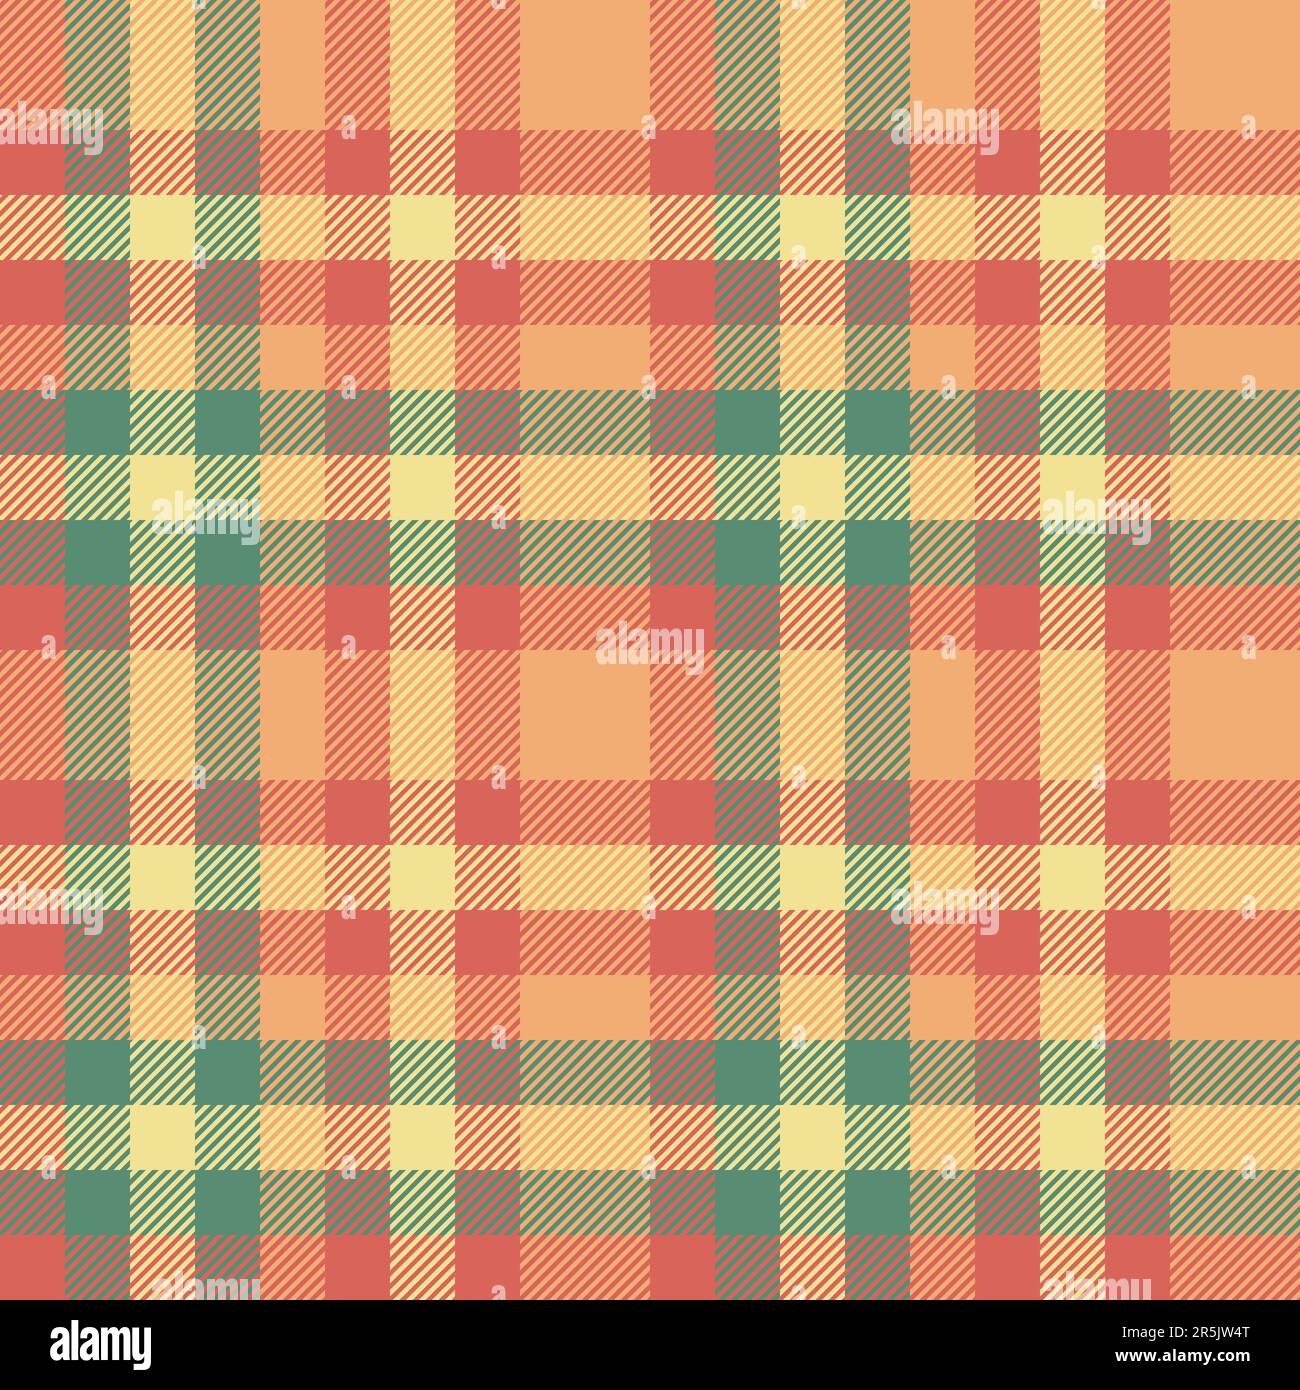 Textile pattern fabric of texture check vector with a seamless plaid tartan background in red and orange colors. Stock Vector